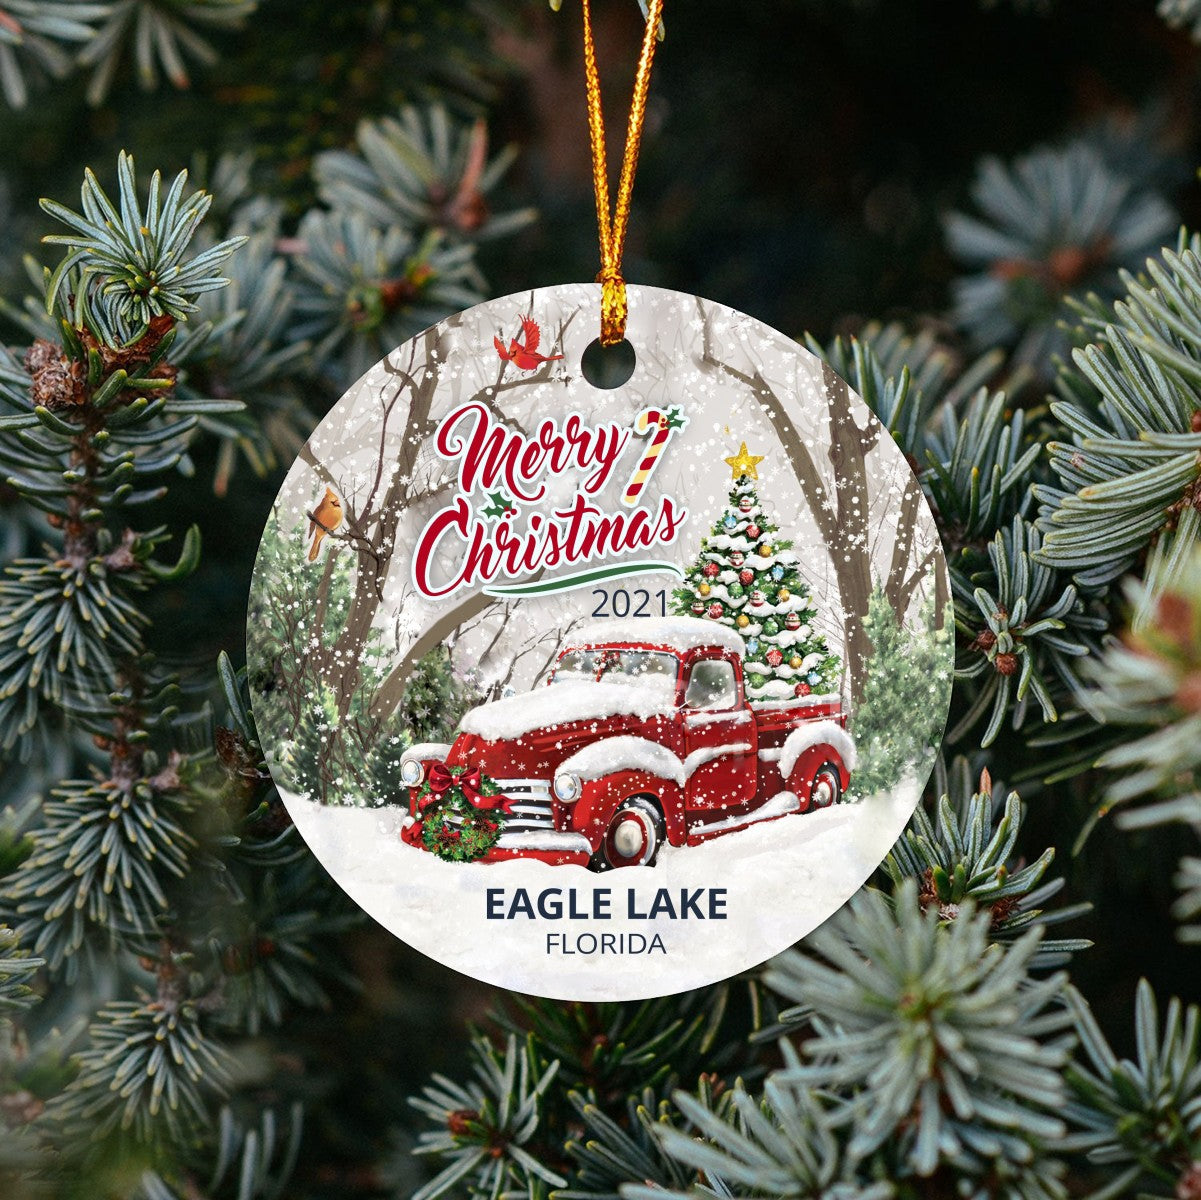 Christmas Tree Ornaments Eagle Lake - Ornament With Name City, State Eagle Lake Florida FL Ornament - Red Truck Xmas Ornaments 3'' Plastic Gift For Family, Friend And Housewarming